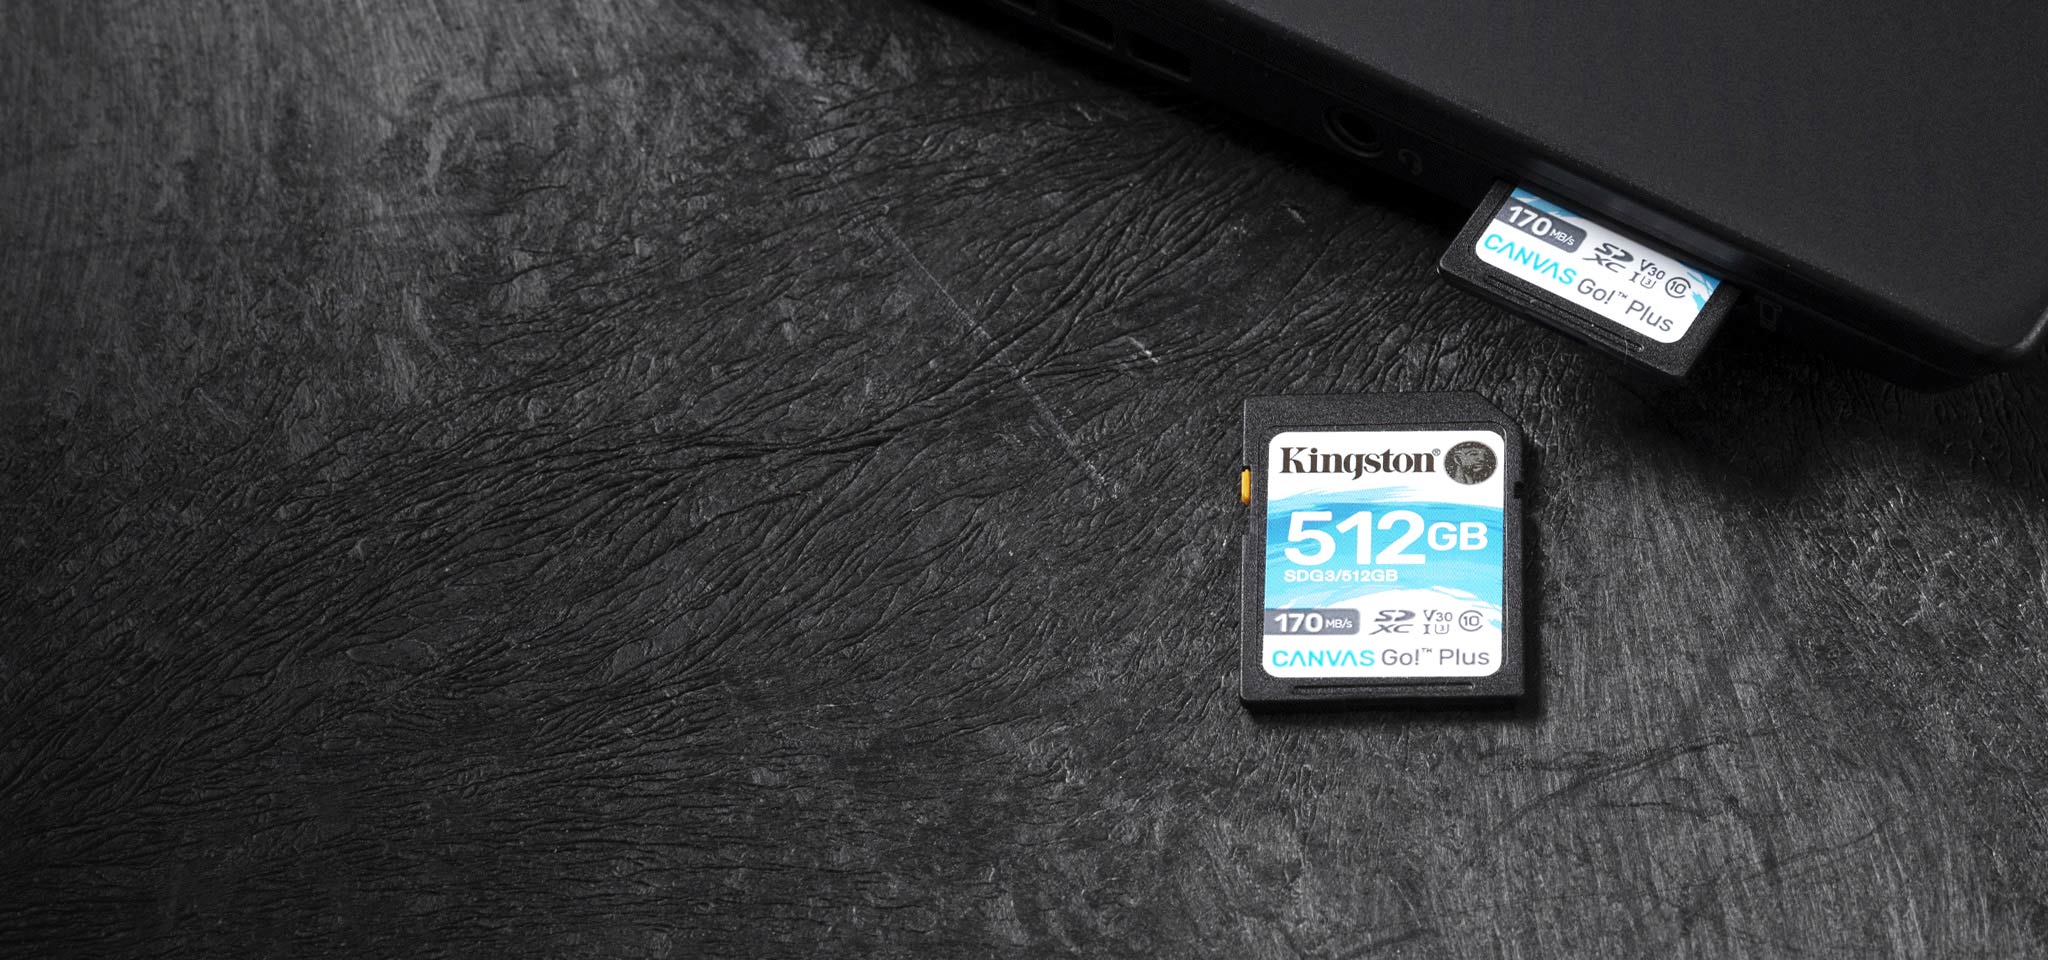 Kingston Industrial Grade 8GB Kyocera S2720 MicroSDHC Card Verified by SanFlash. 90MBs Works for Kingston